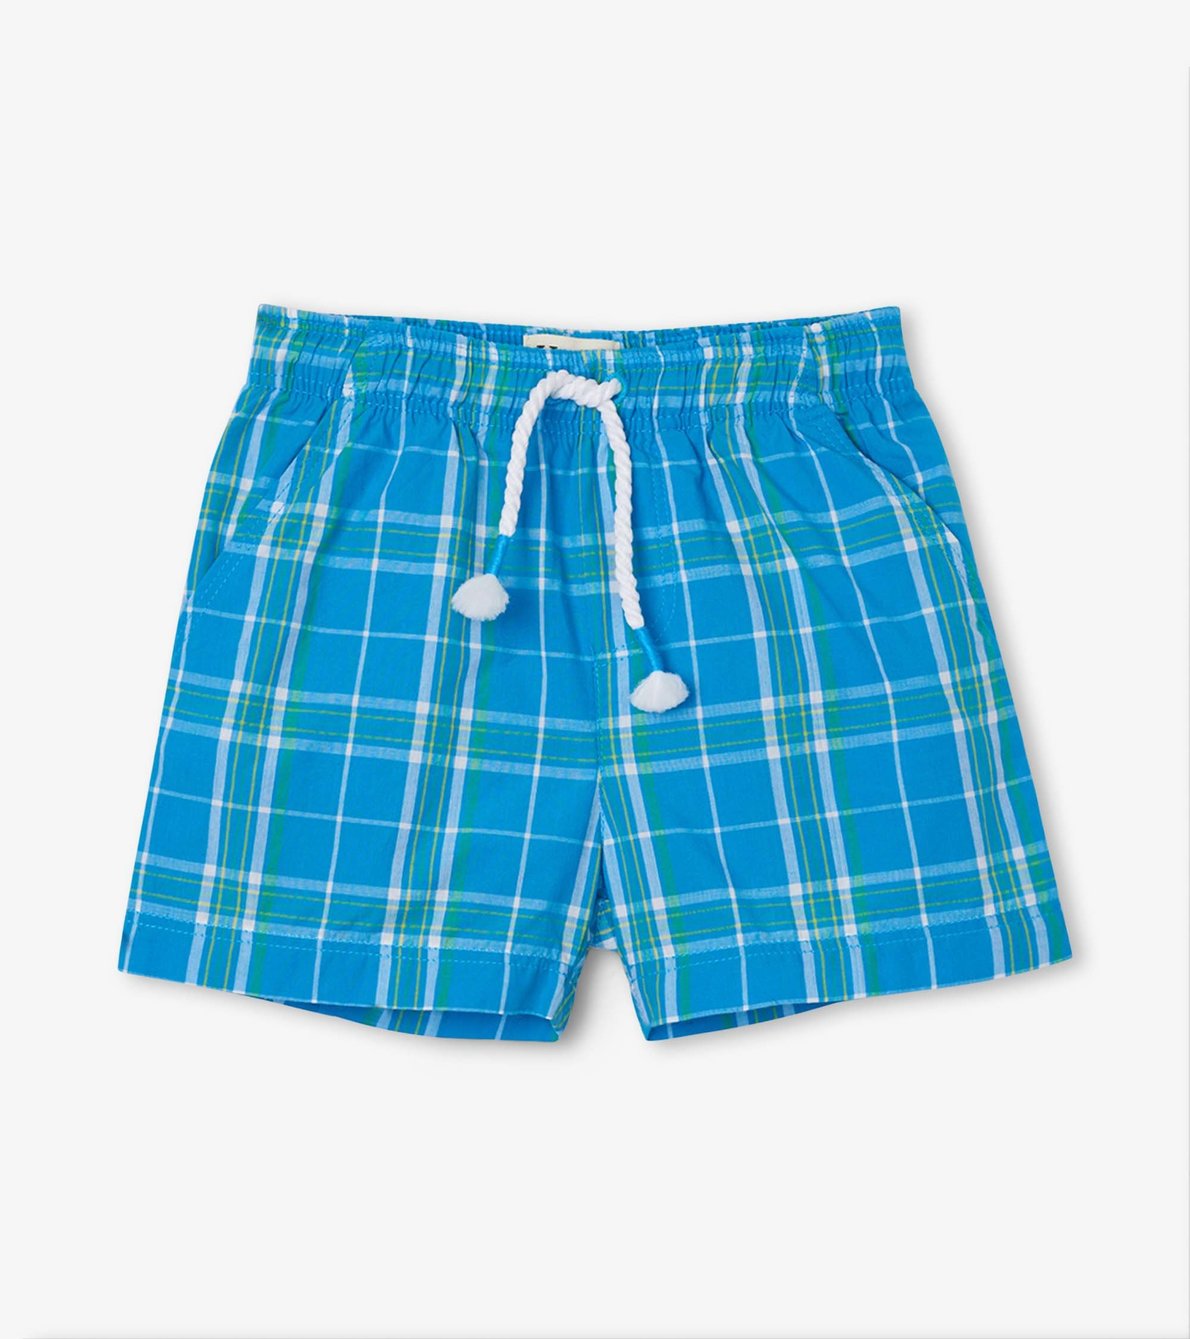 View larger image of Summer Plaid Baby Woven Shorts